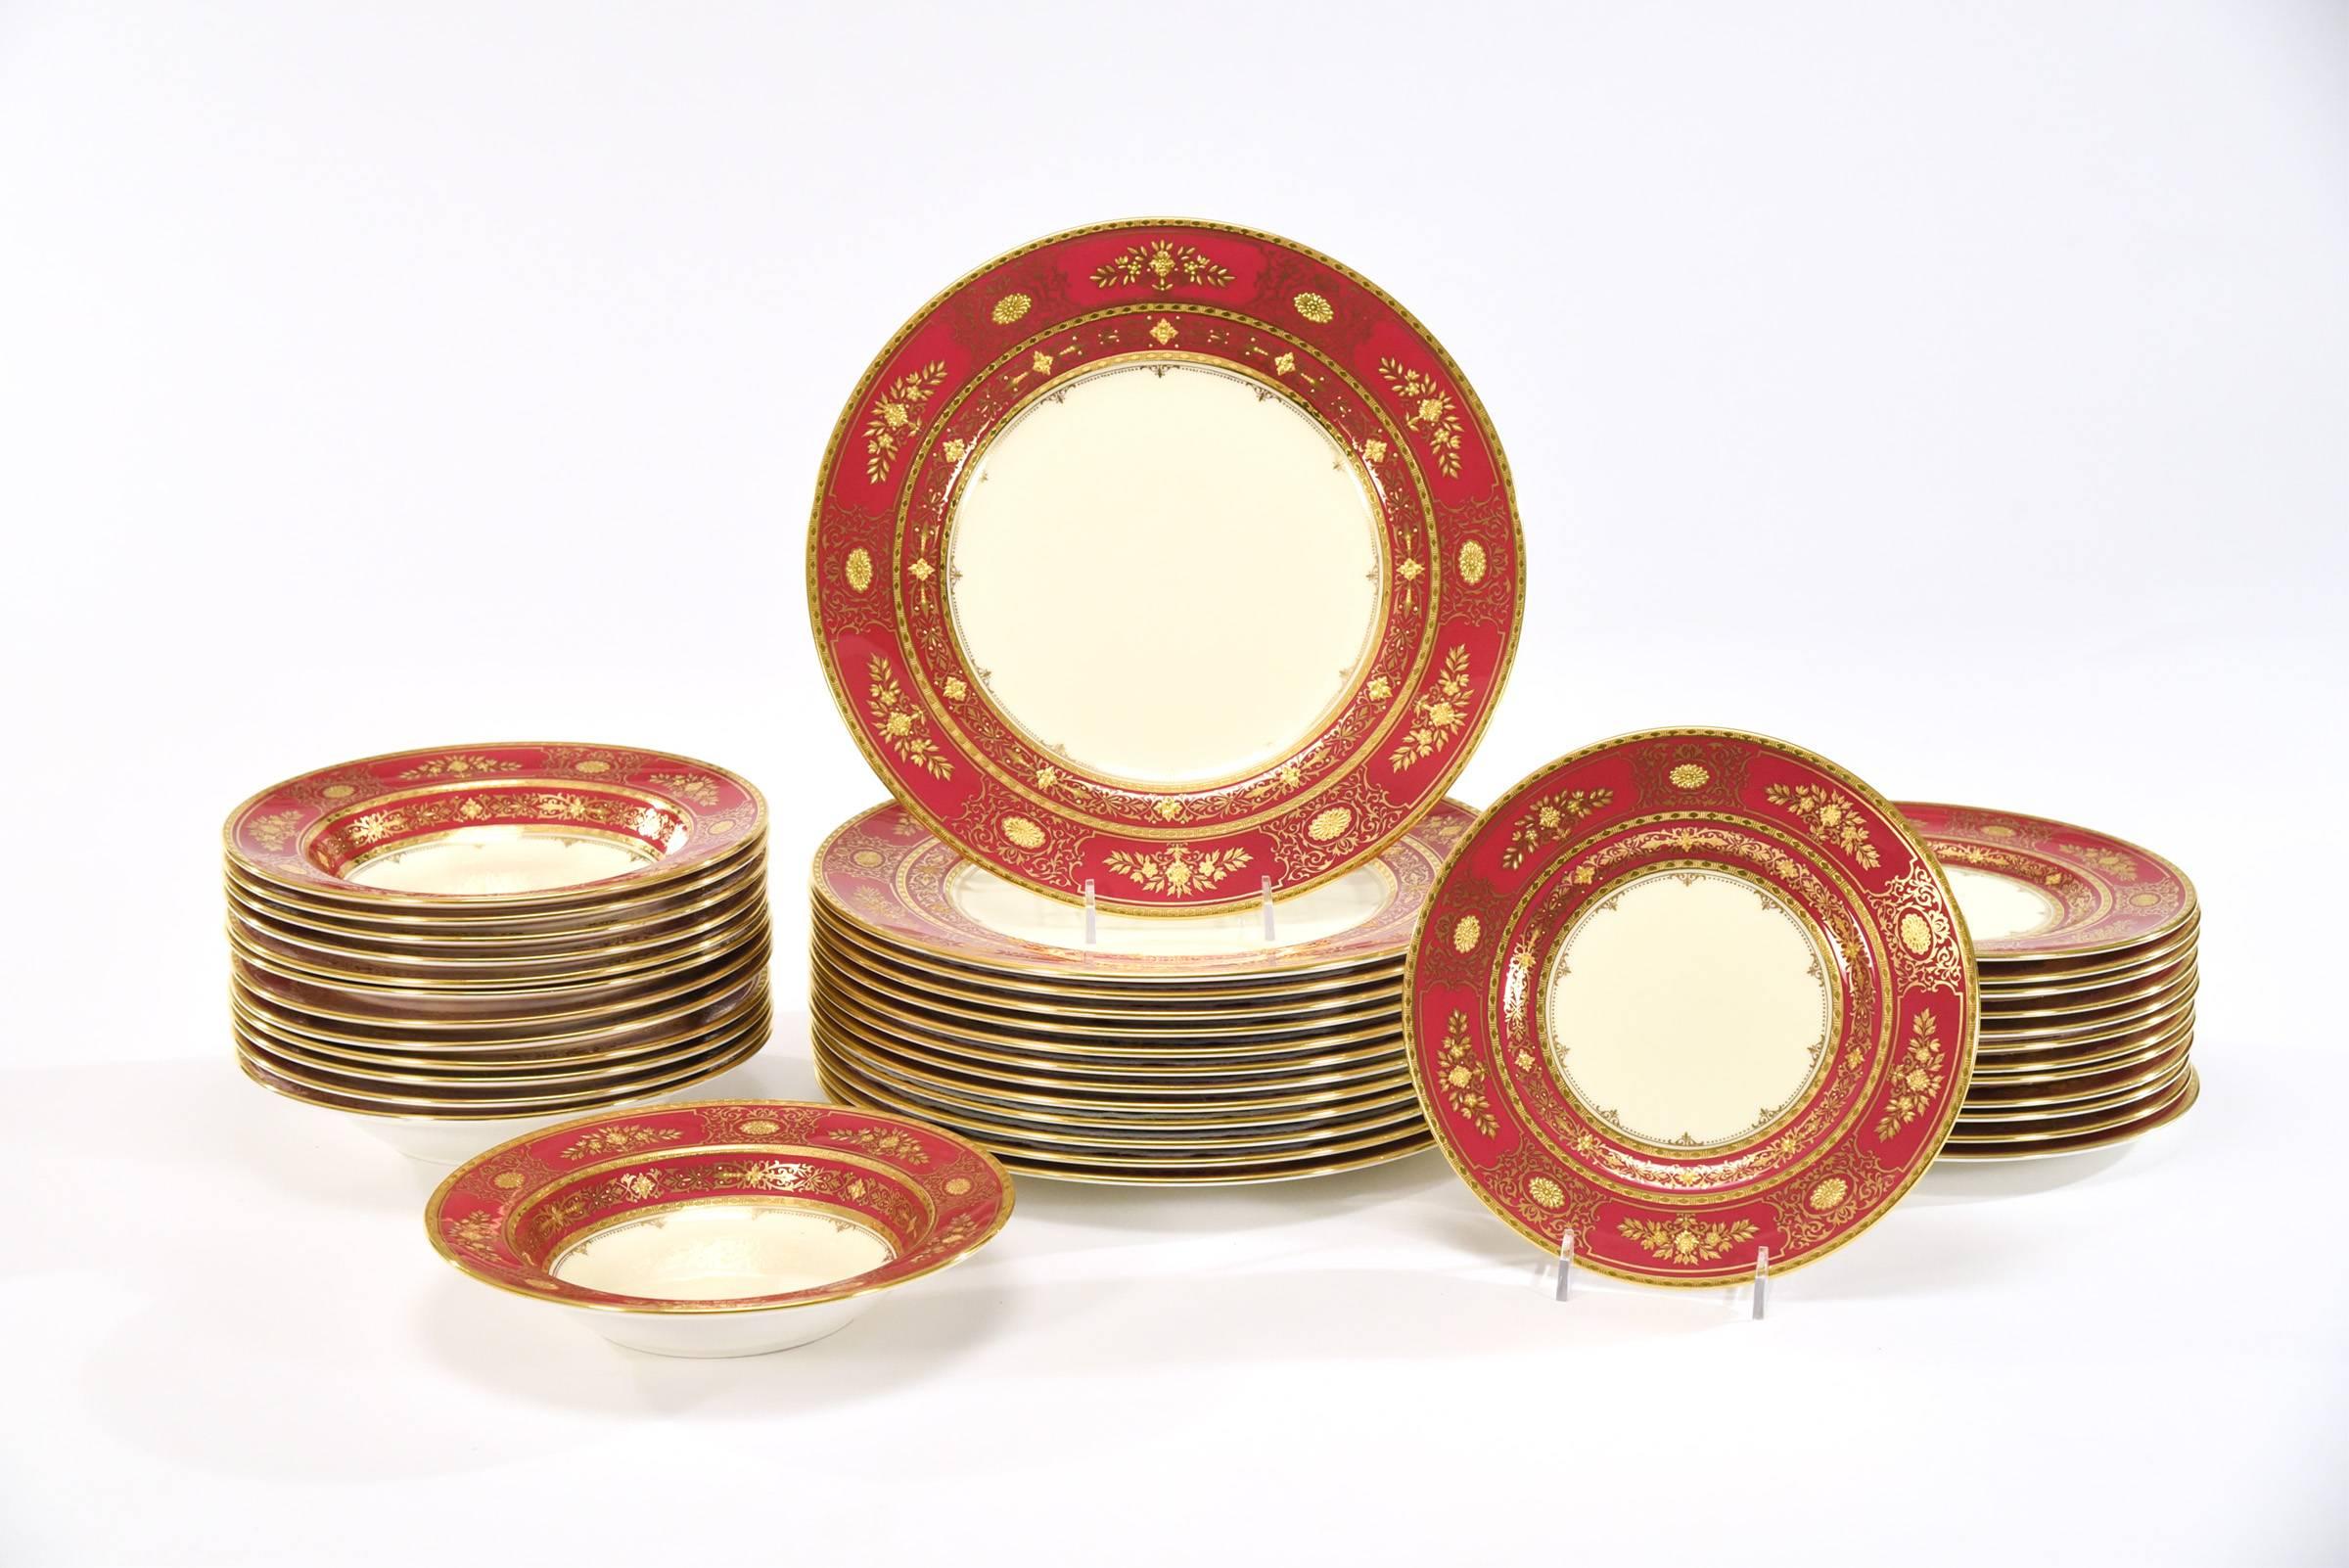 This is a fabulous dinner service made by Minton for Tiffany with a custom-order red/burgundy border, ready for holiday entertaining! The centre ground is a soft ivory, providing a dramatic contrast to the borders which are decorated in an elegant